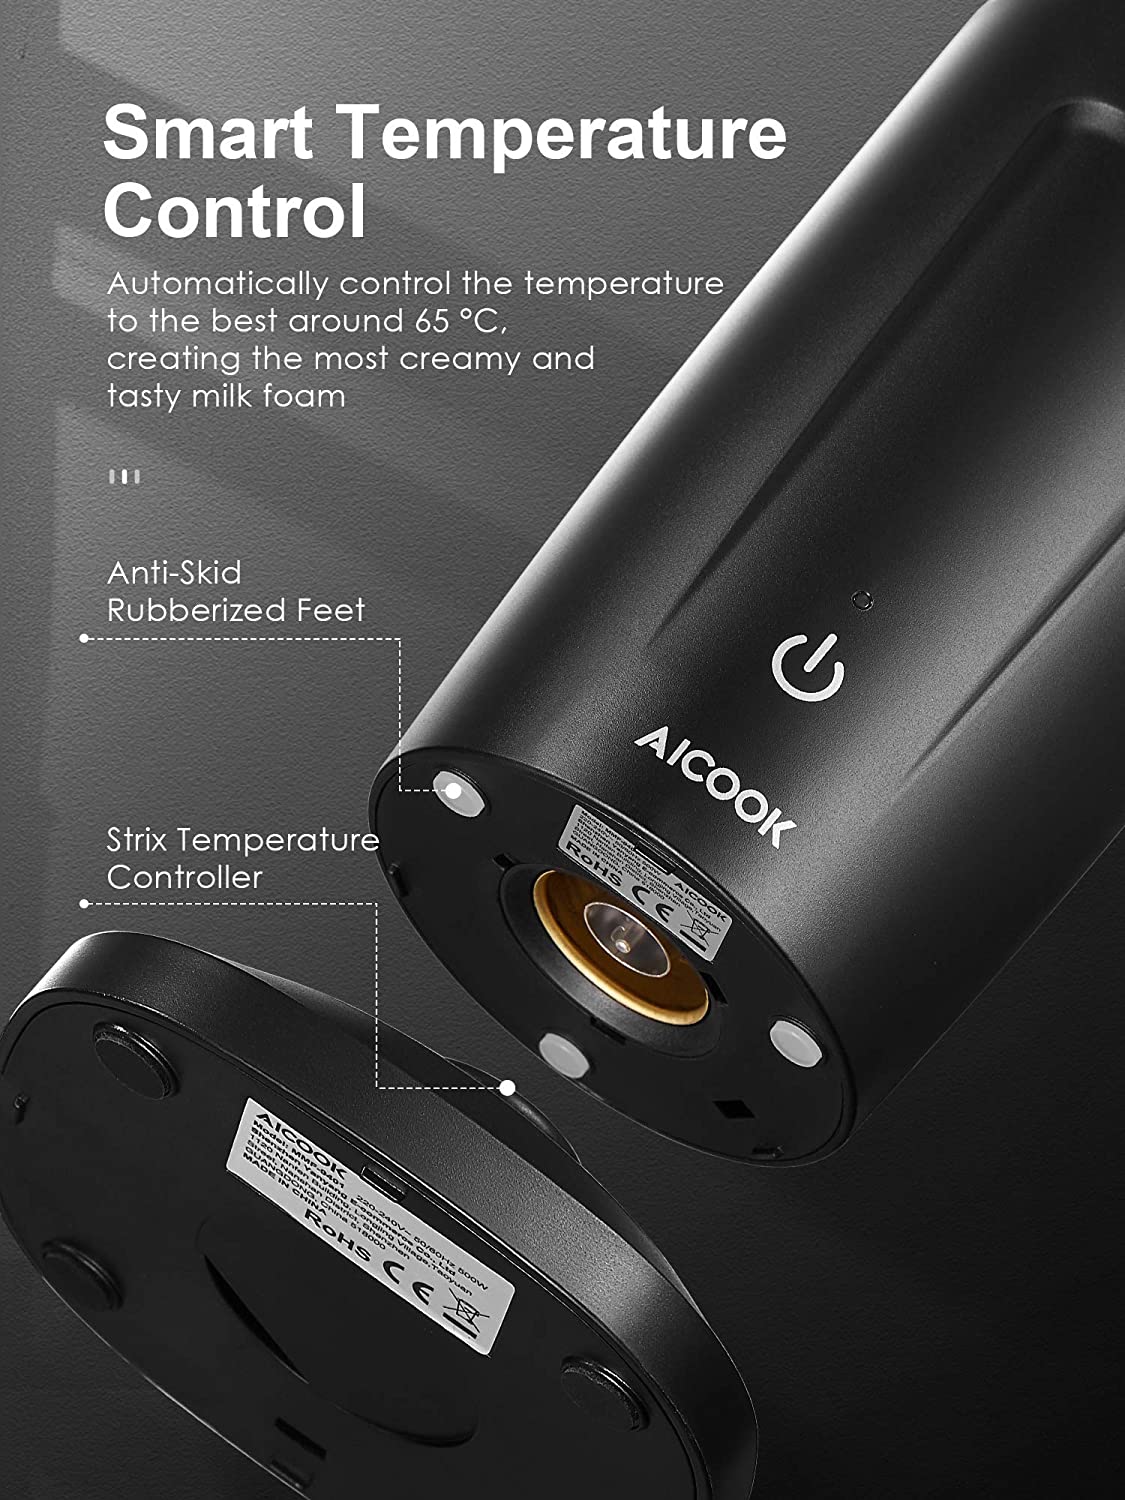 AICOOK | Milk Frother Electric, Hot & Cold Milk Frother and Steamer with Strix Control, Coffee Frother With Auto Magnetic Drive Rotor, For Latte etc, Smart Temperature Control